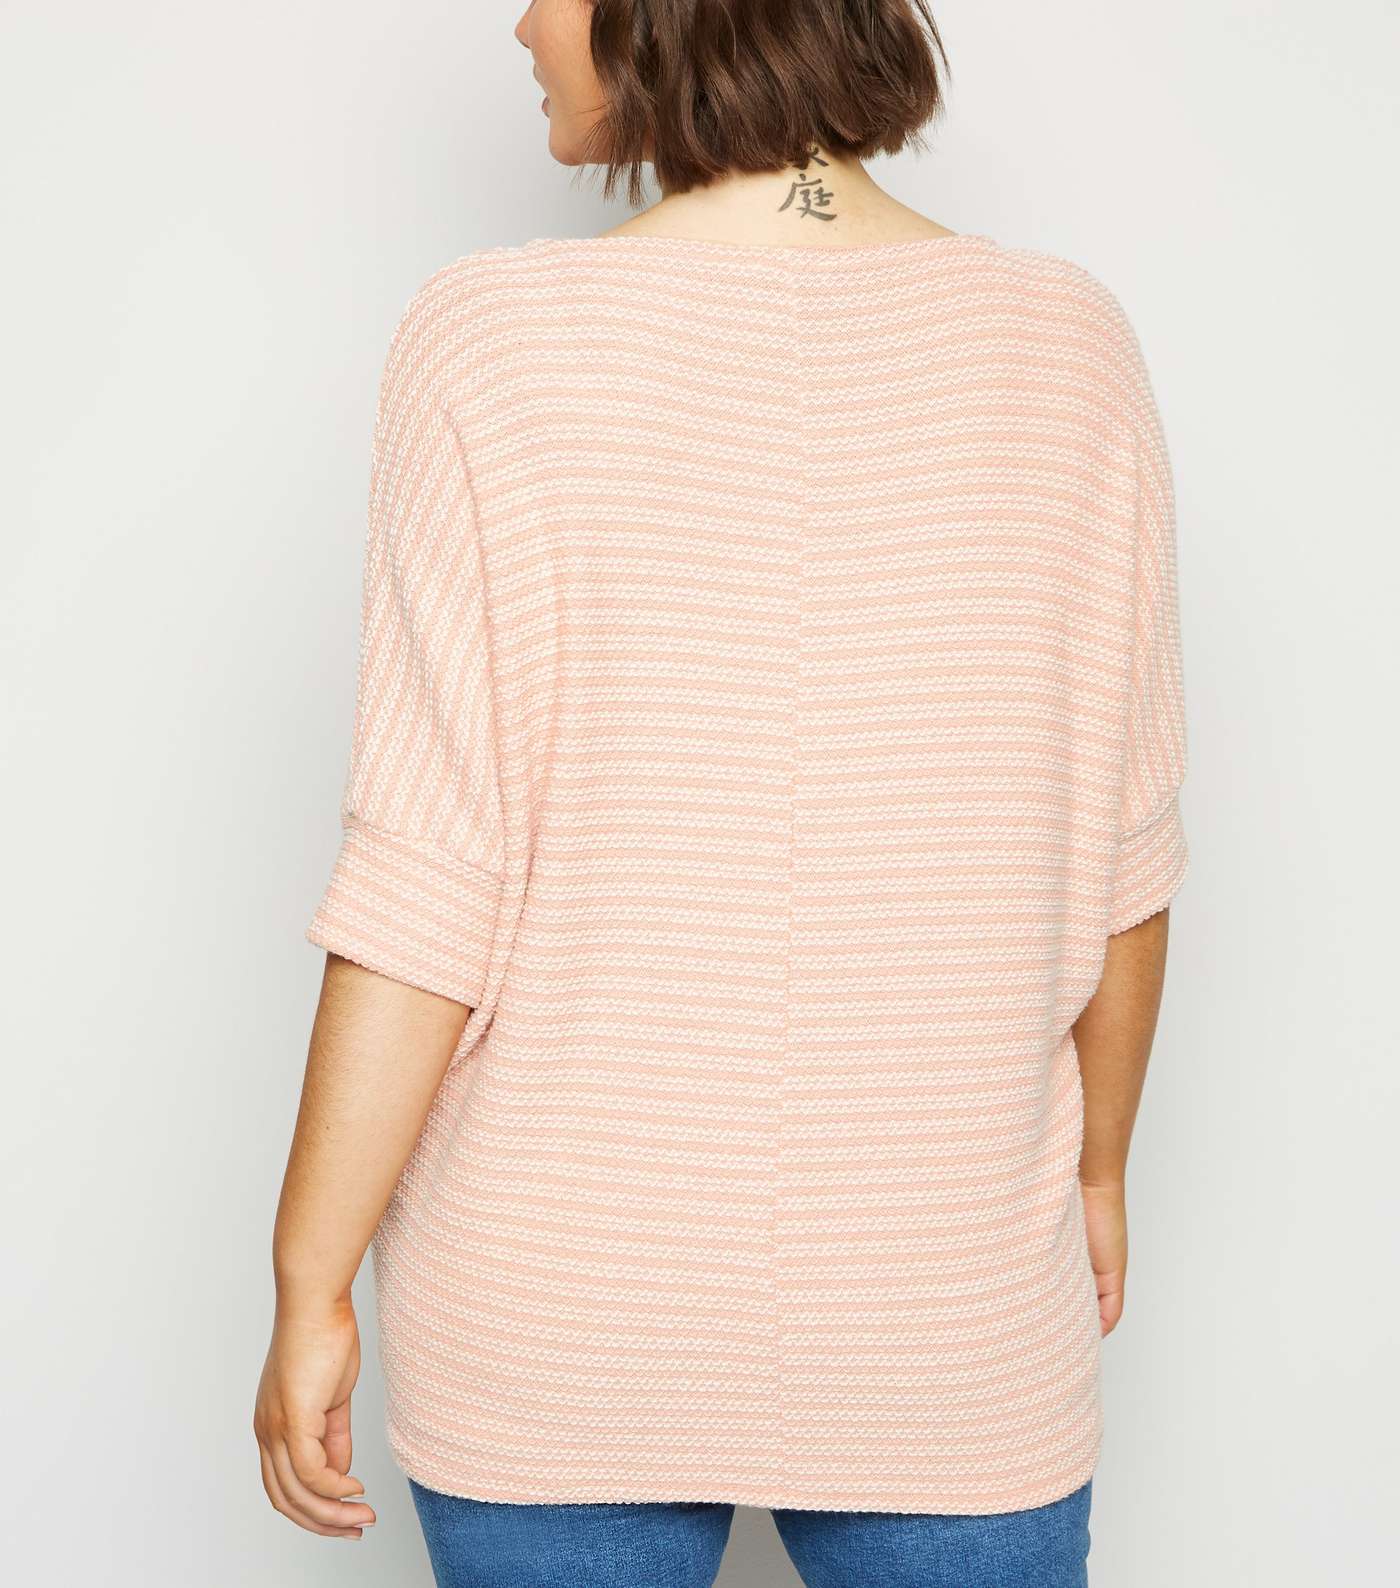 Apricot Curves Pink Batwing Waffle Knit Top Image 3